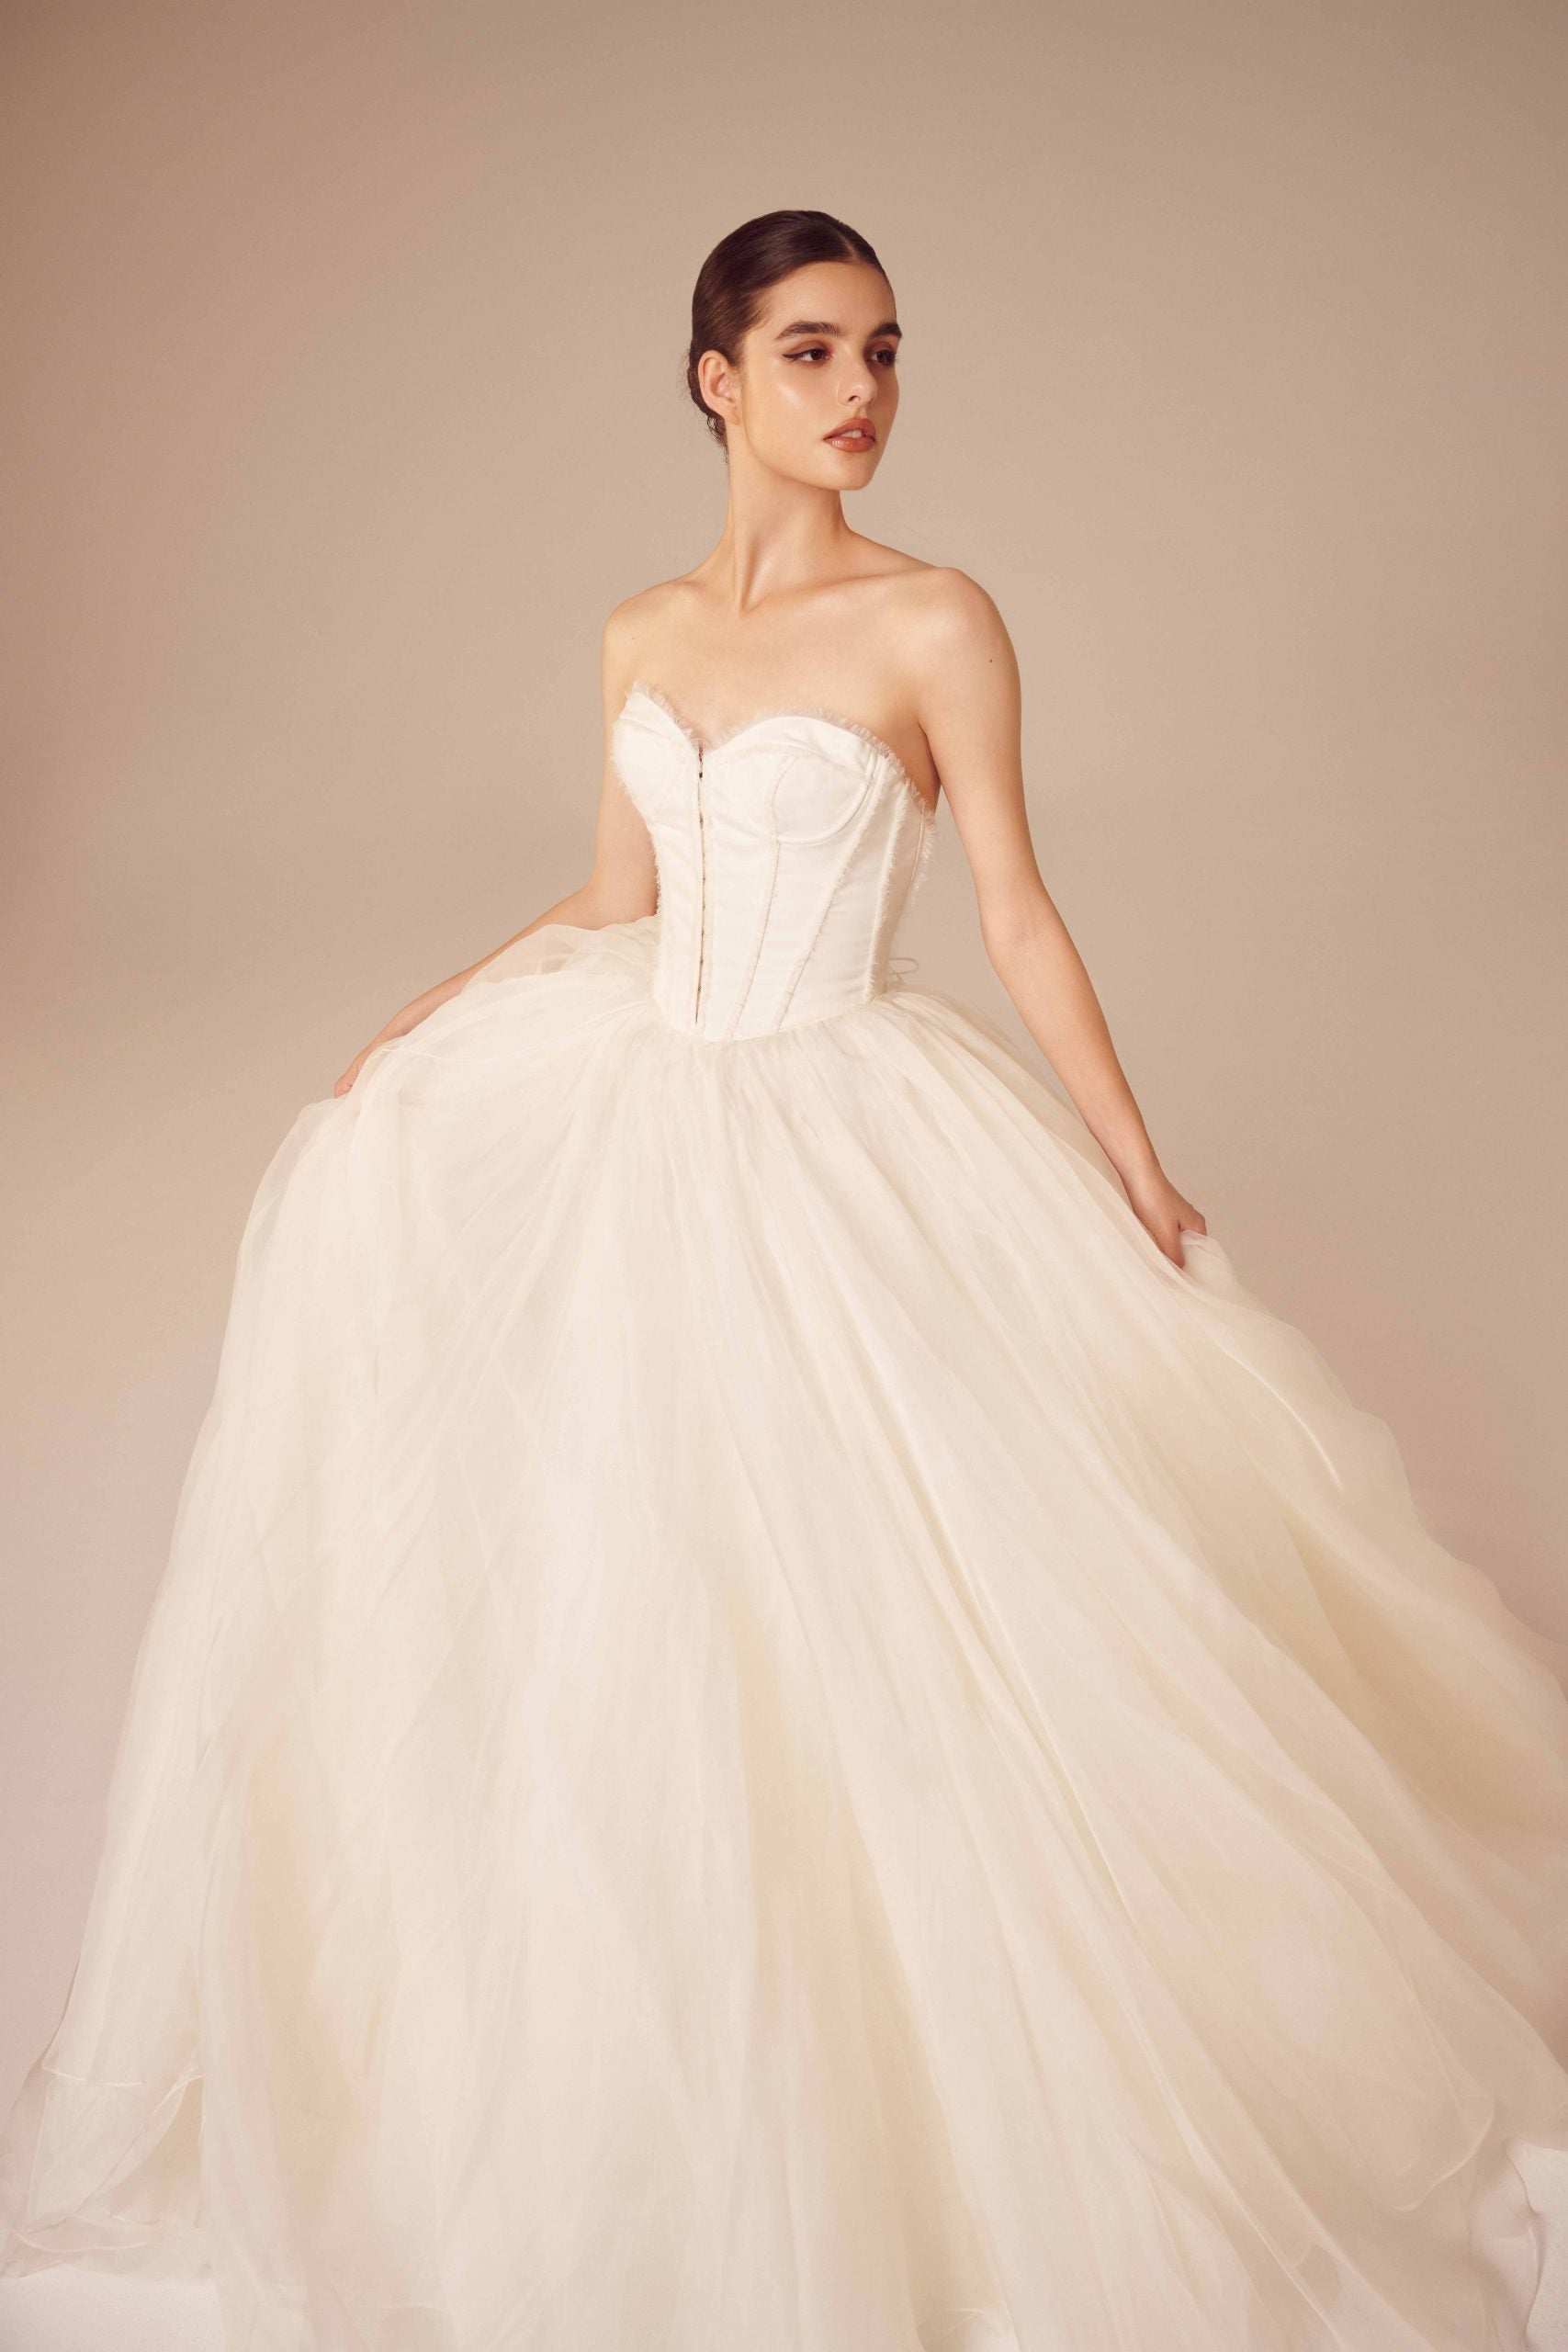 Grand Organza Overskirt by Nicole + Felicia - Image 1